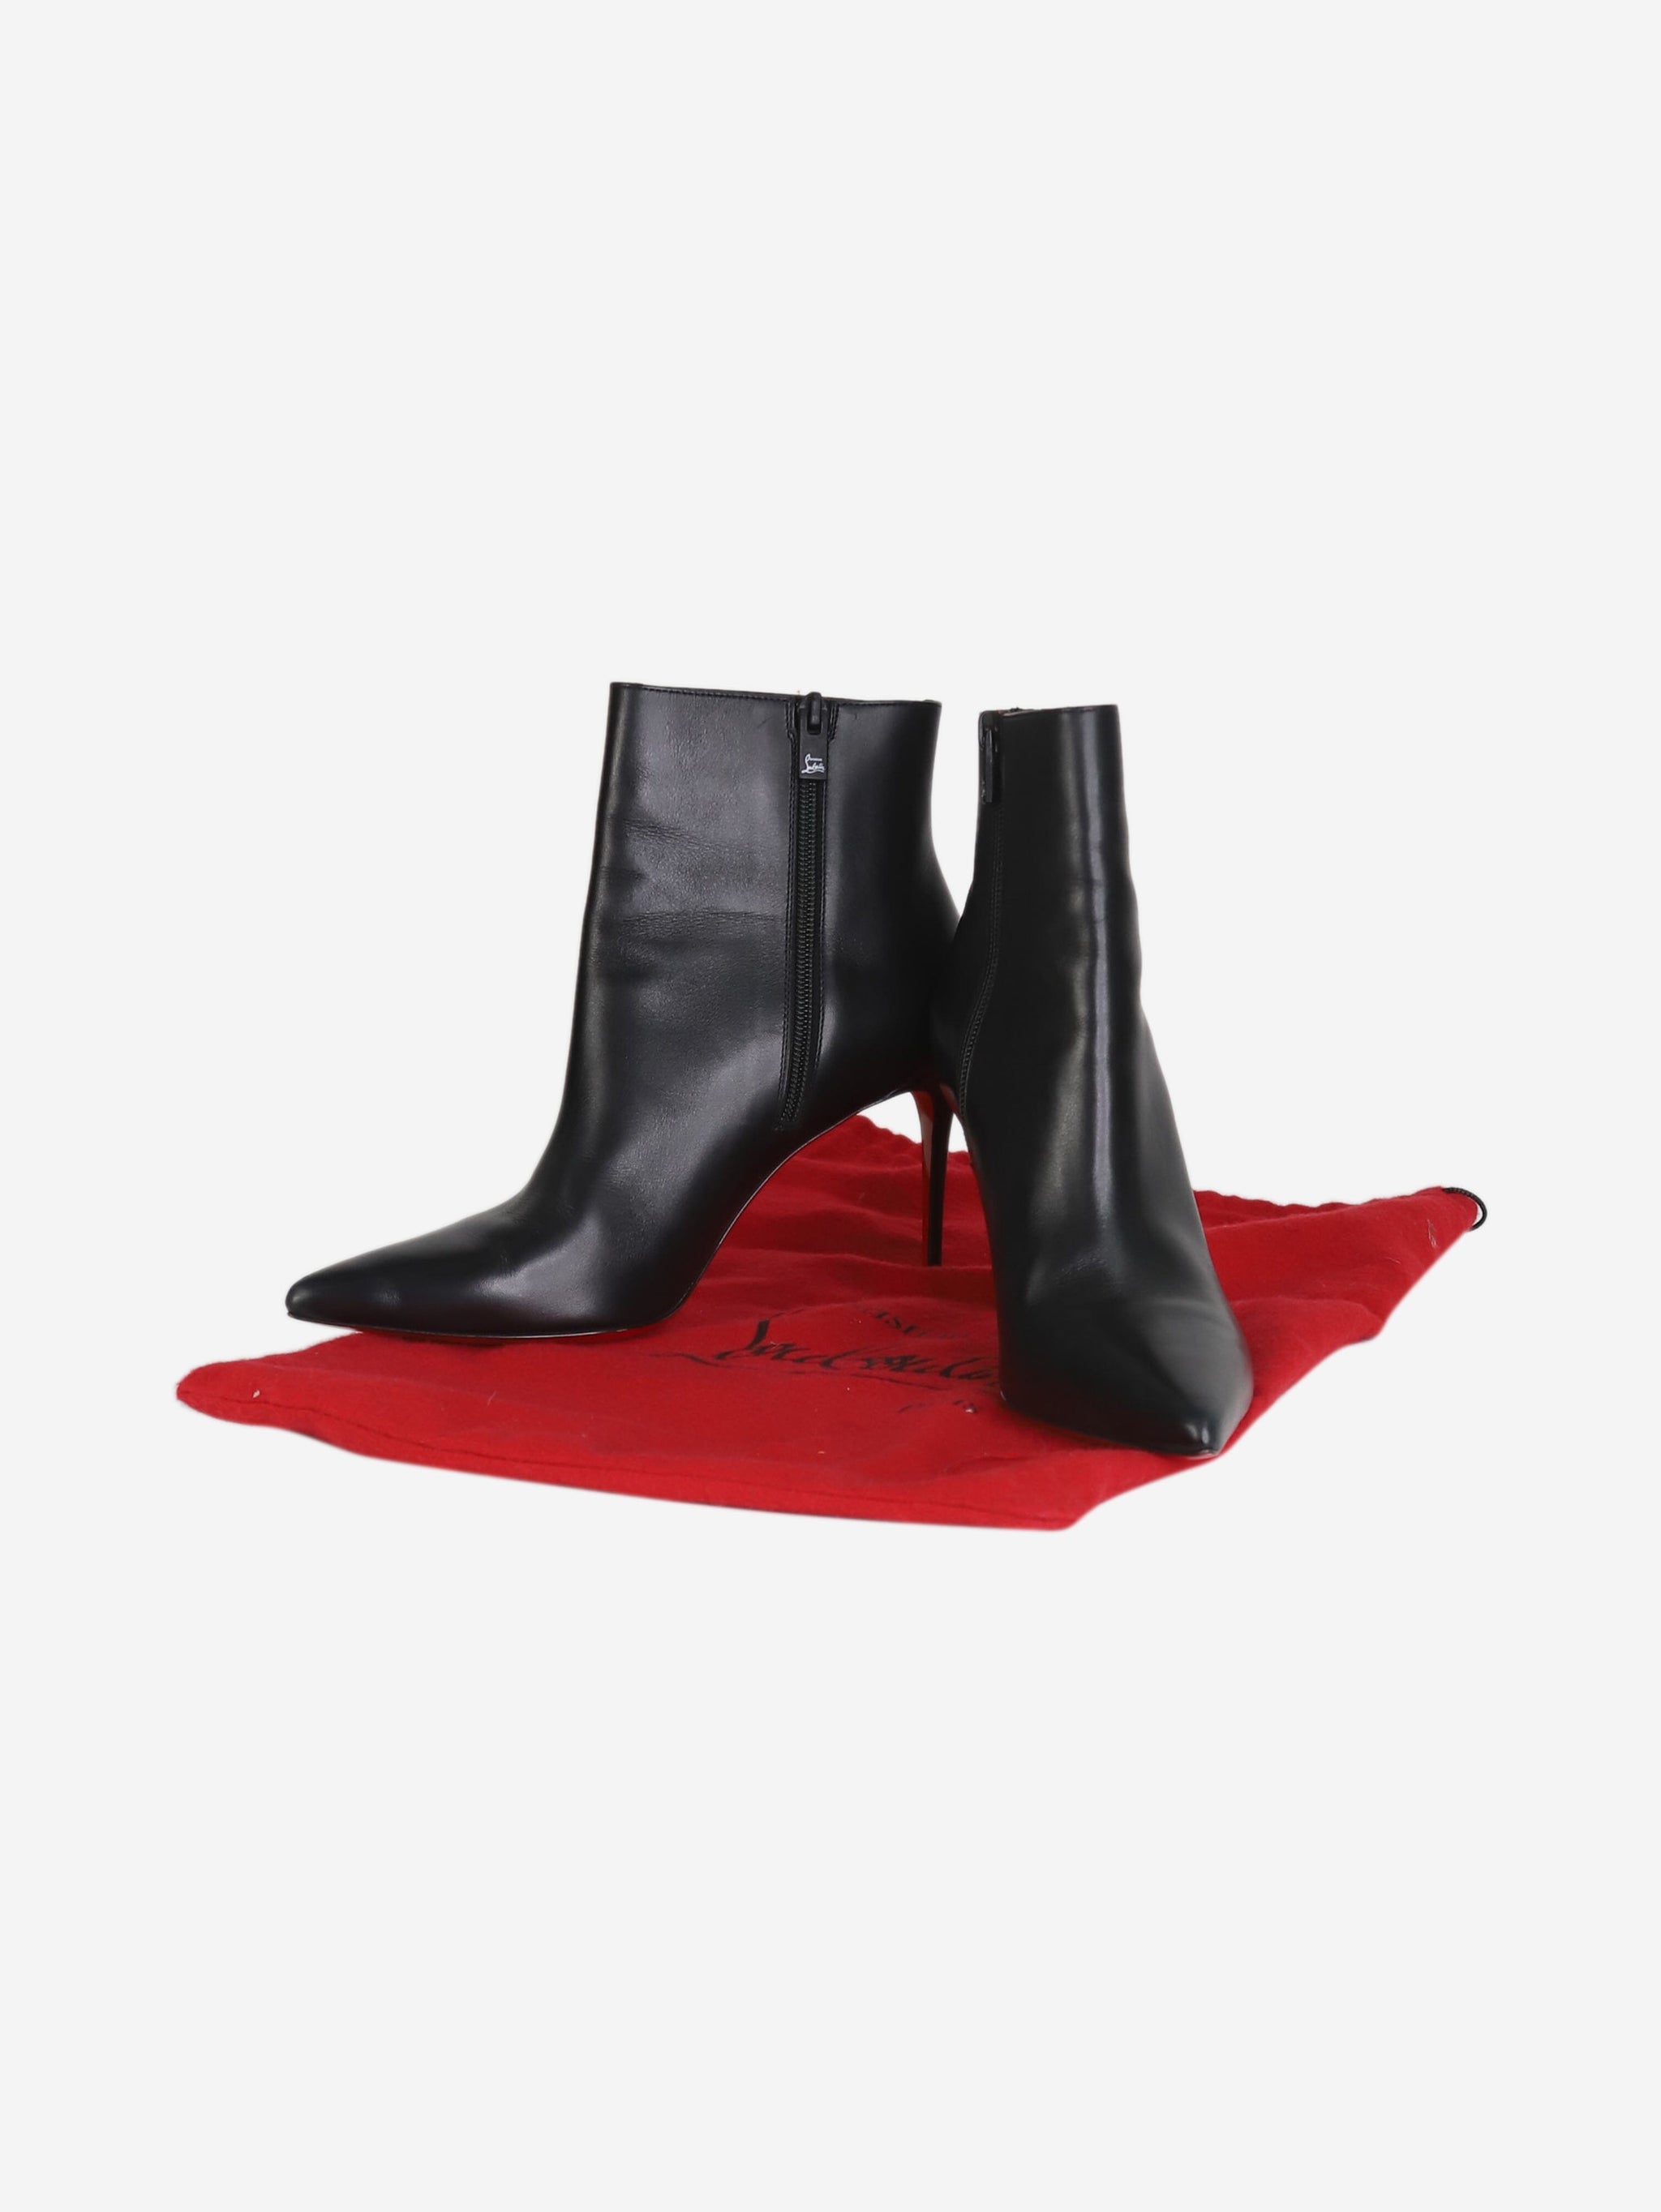 Black pre-owned Christian Louboutin pointed toe boots | Sign of the Times